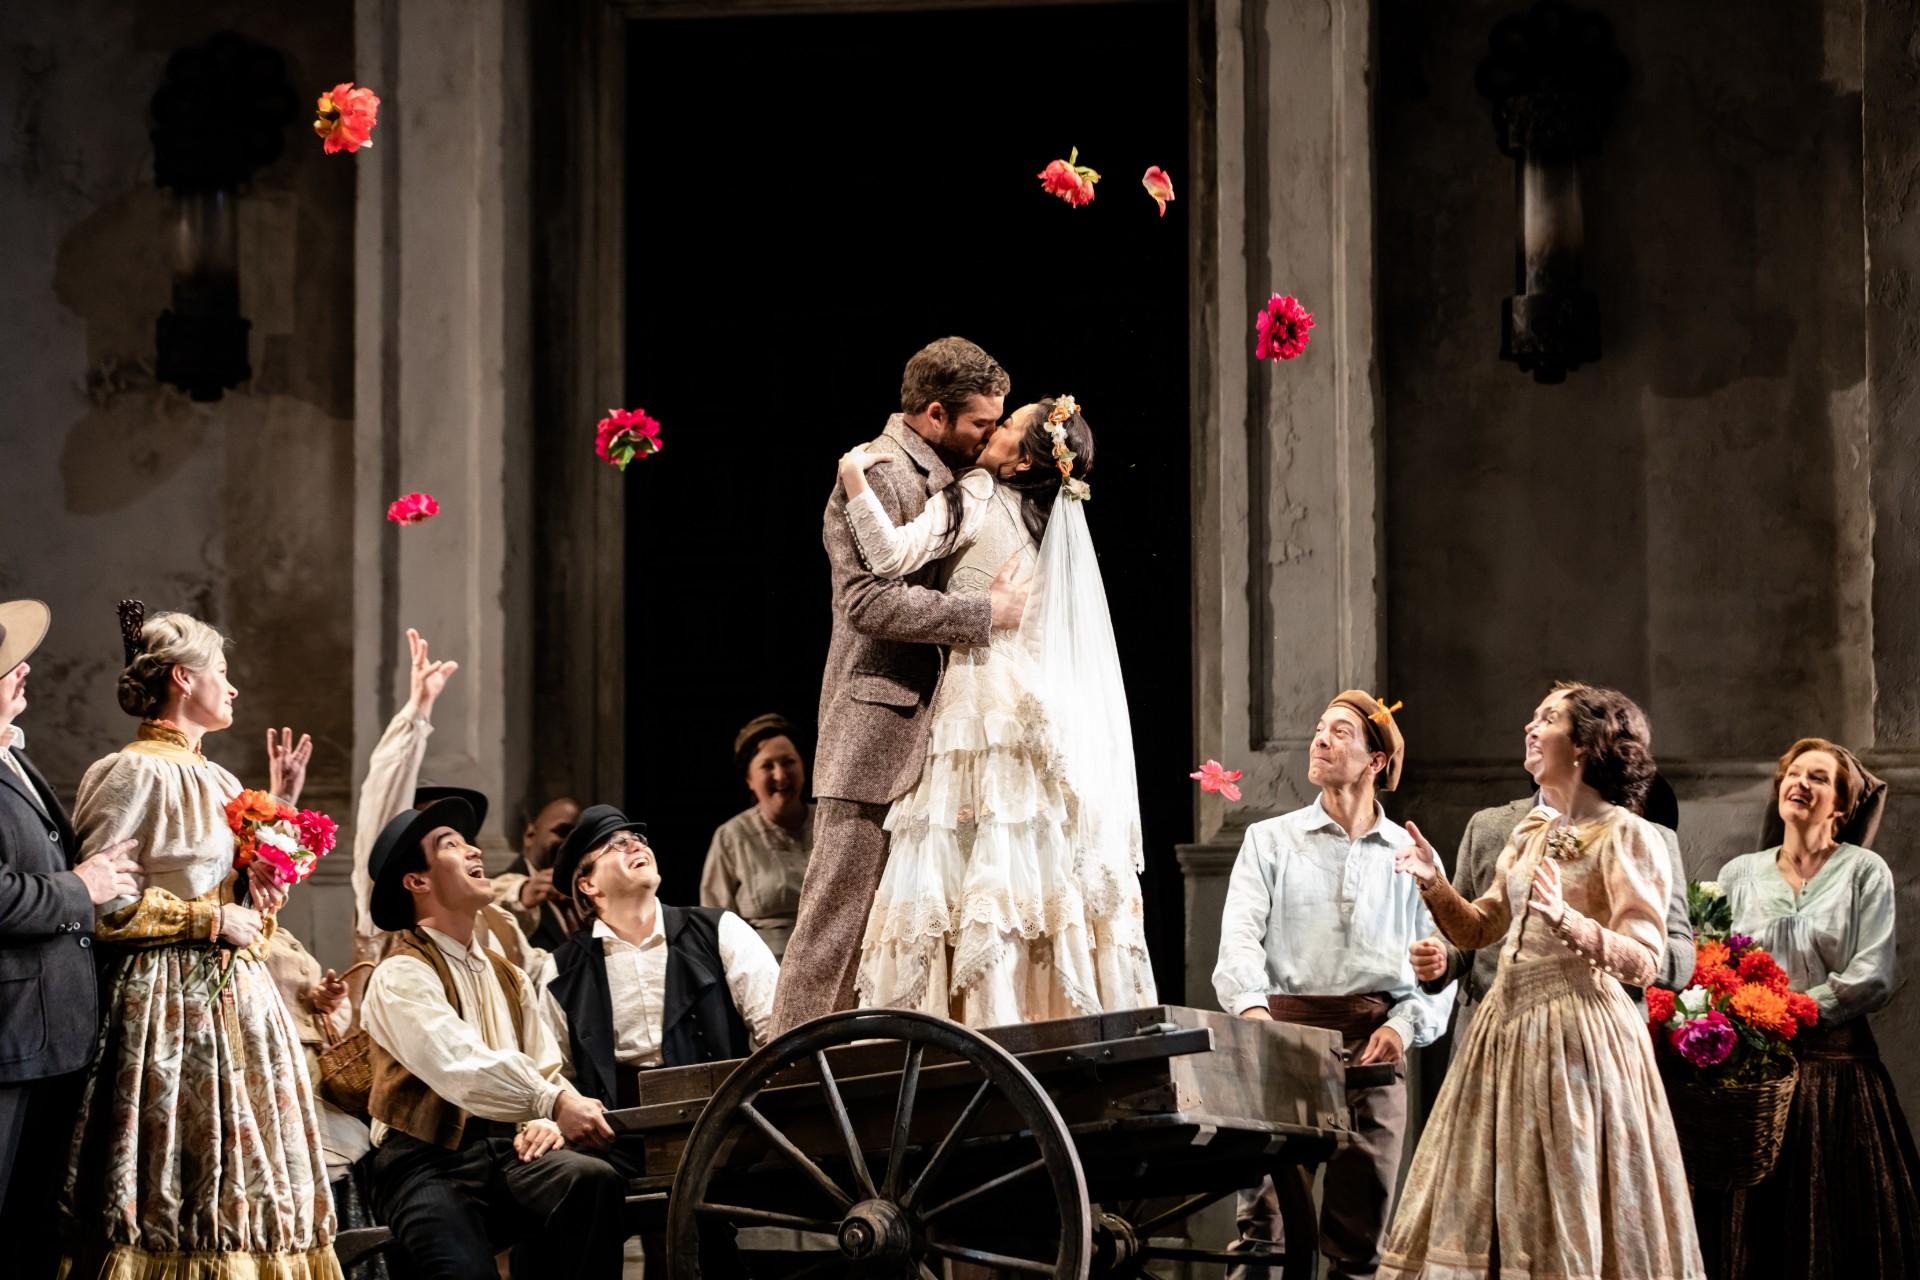 Brandon Cedel and Ying Fang in Lyric Opera of Chicago’s “Don Giovanni.” (Photo by Kyle Flubacker)